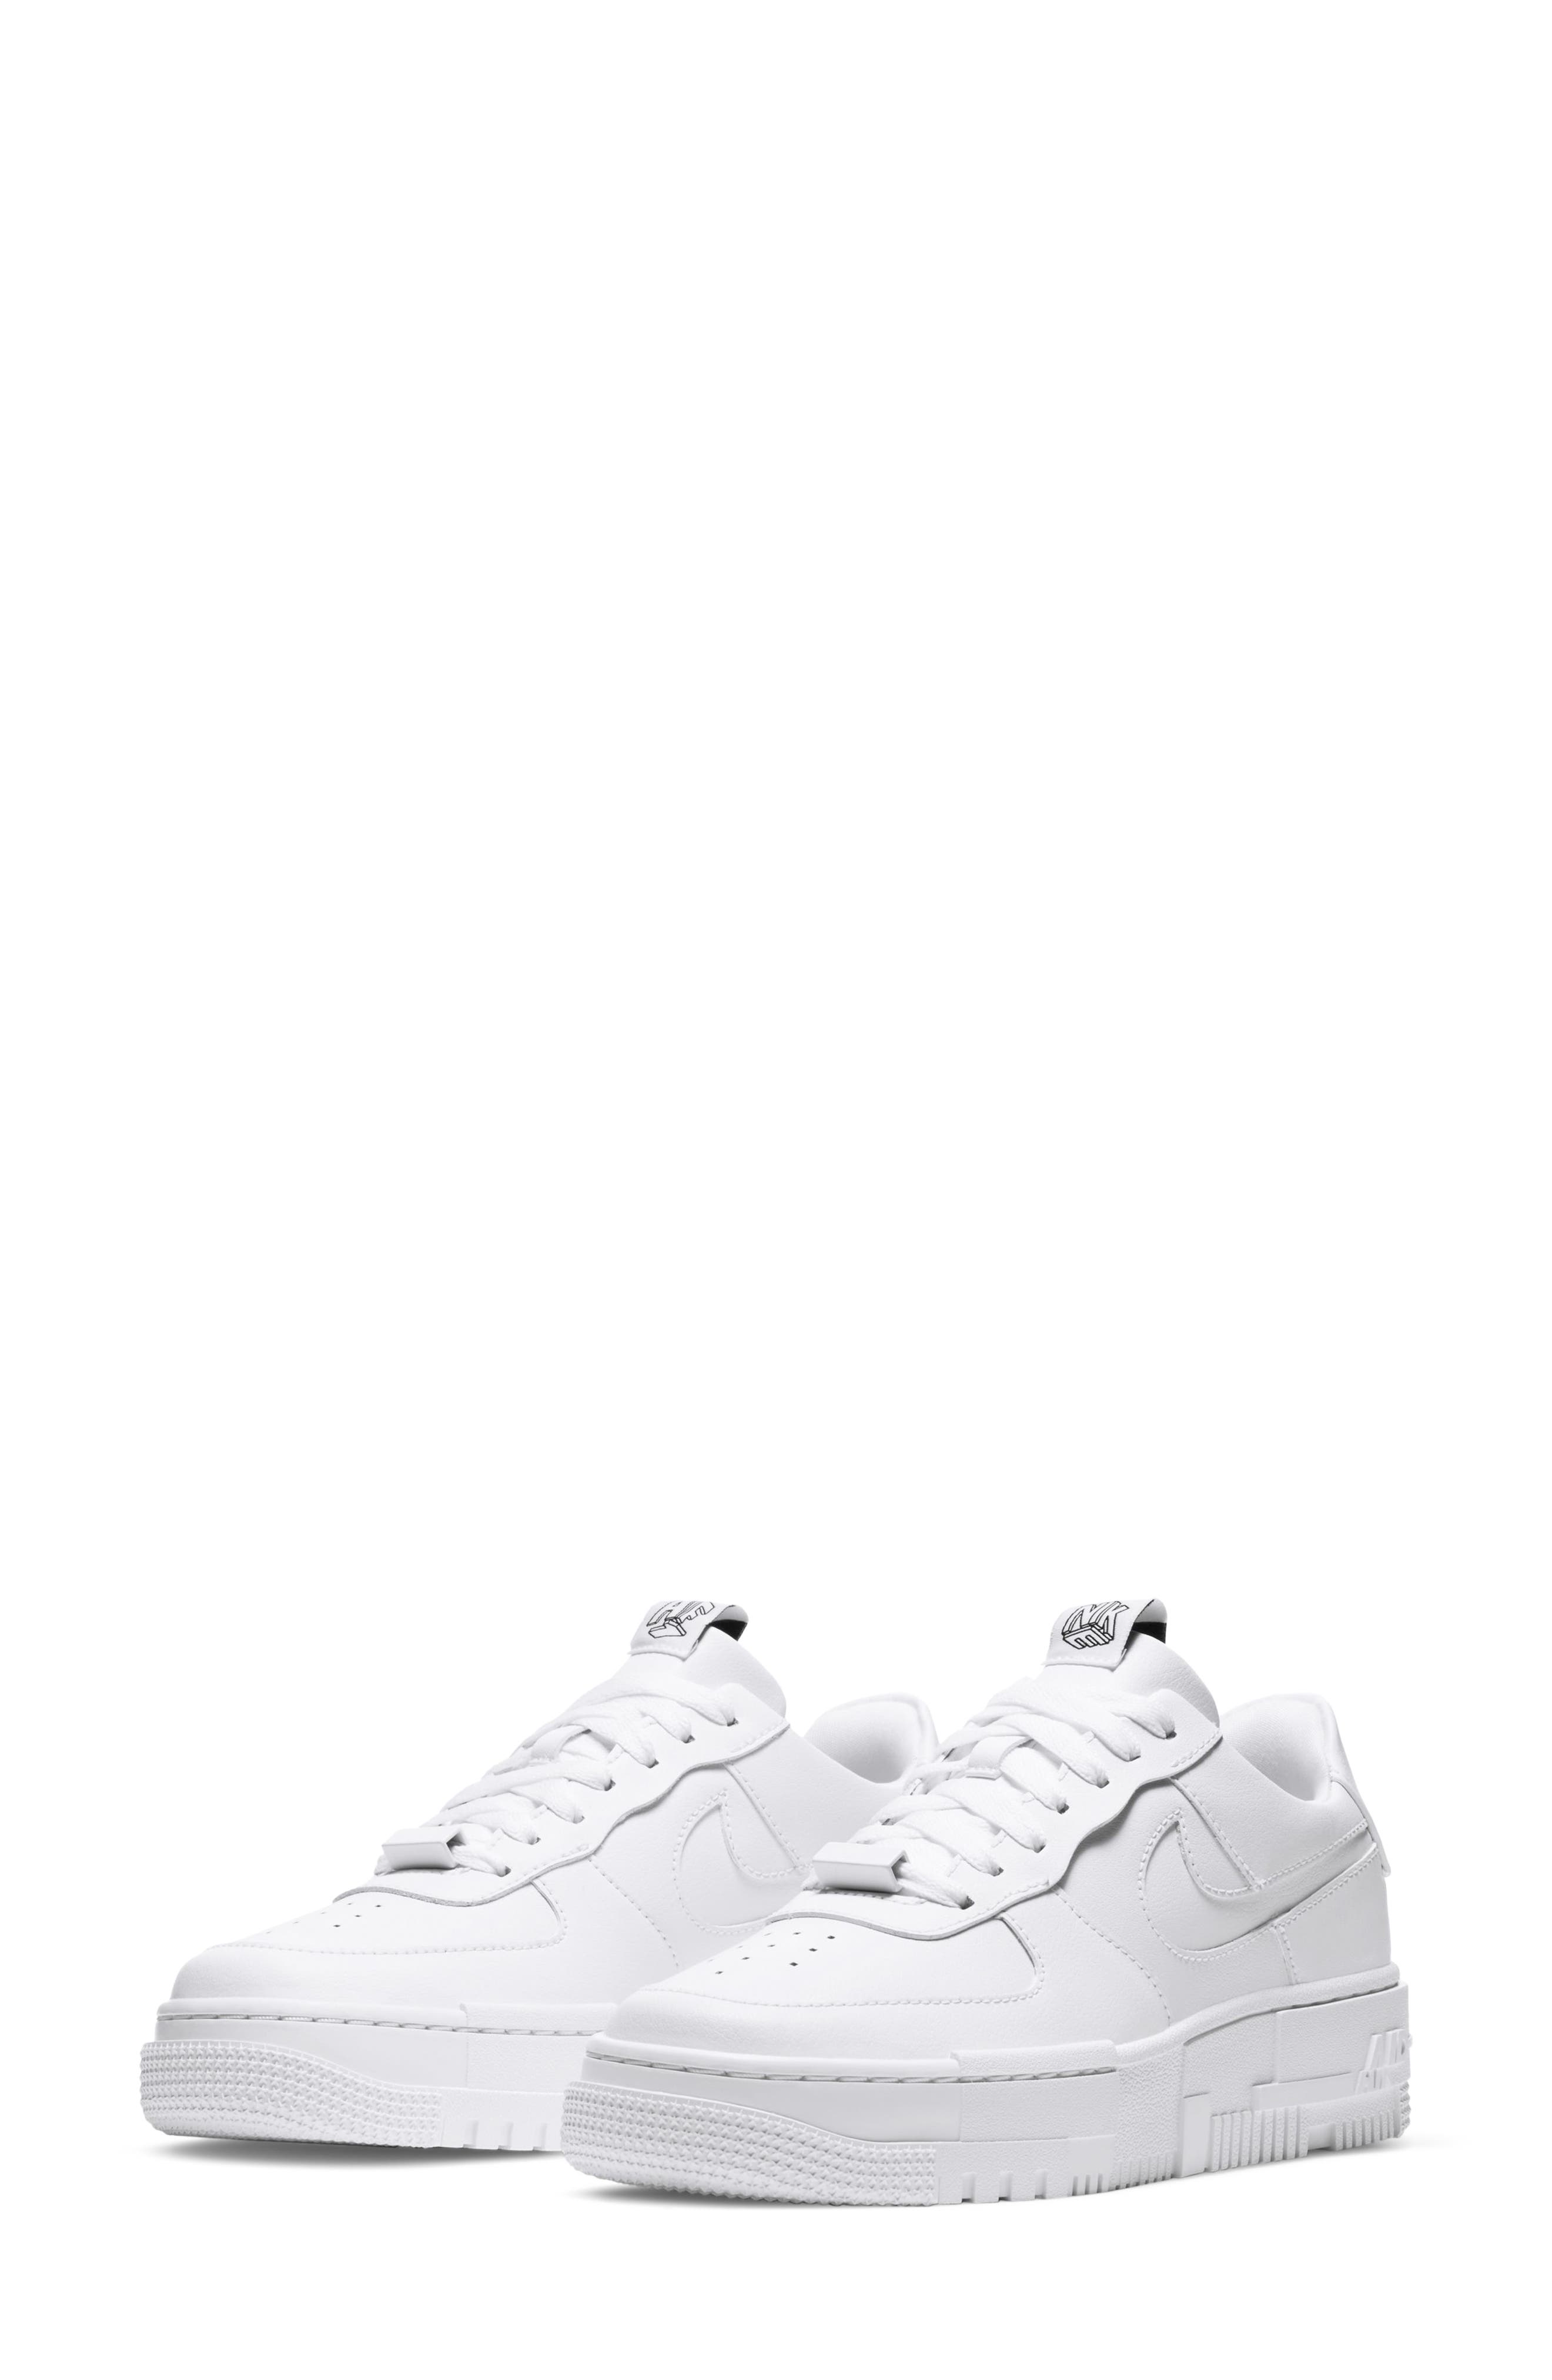 off white sneakers nike womens